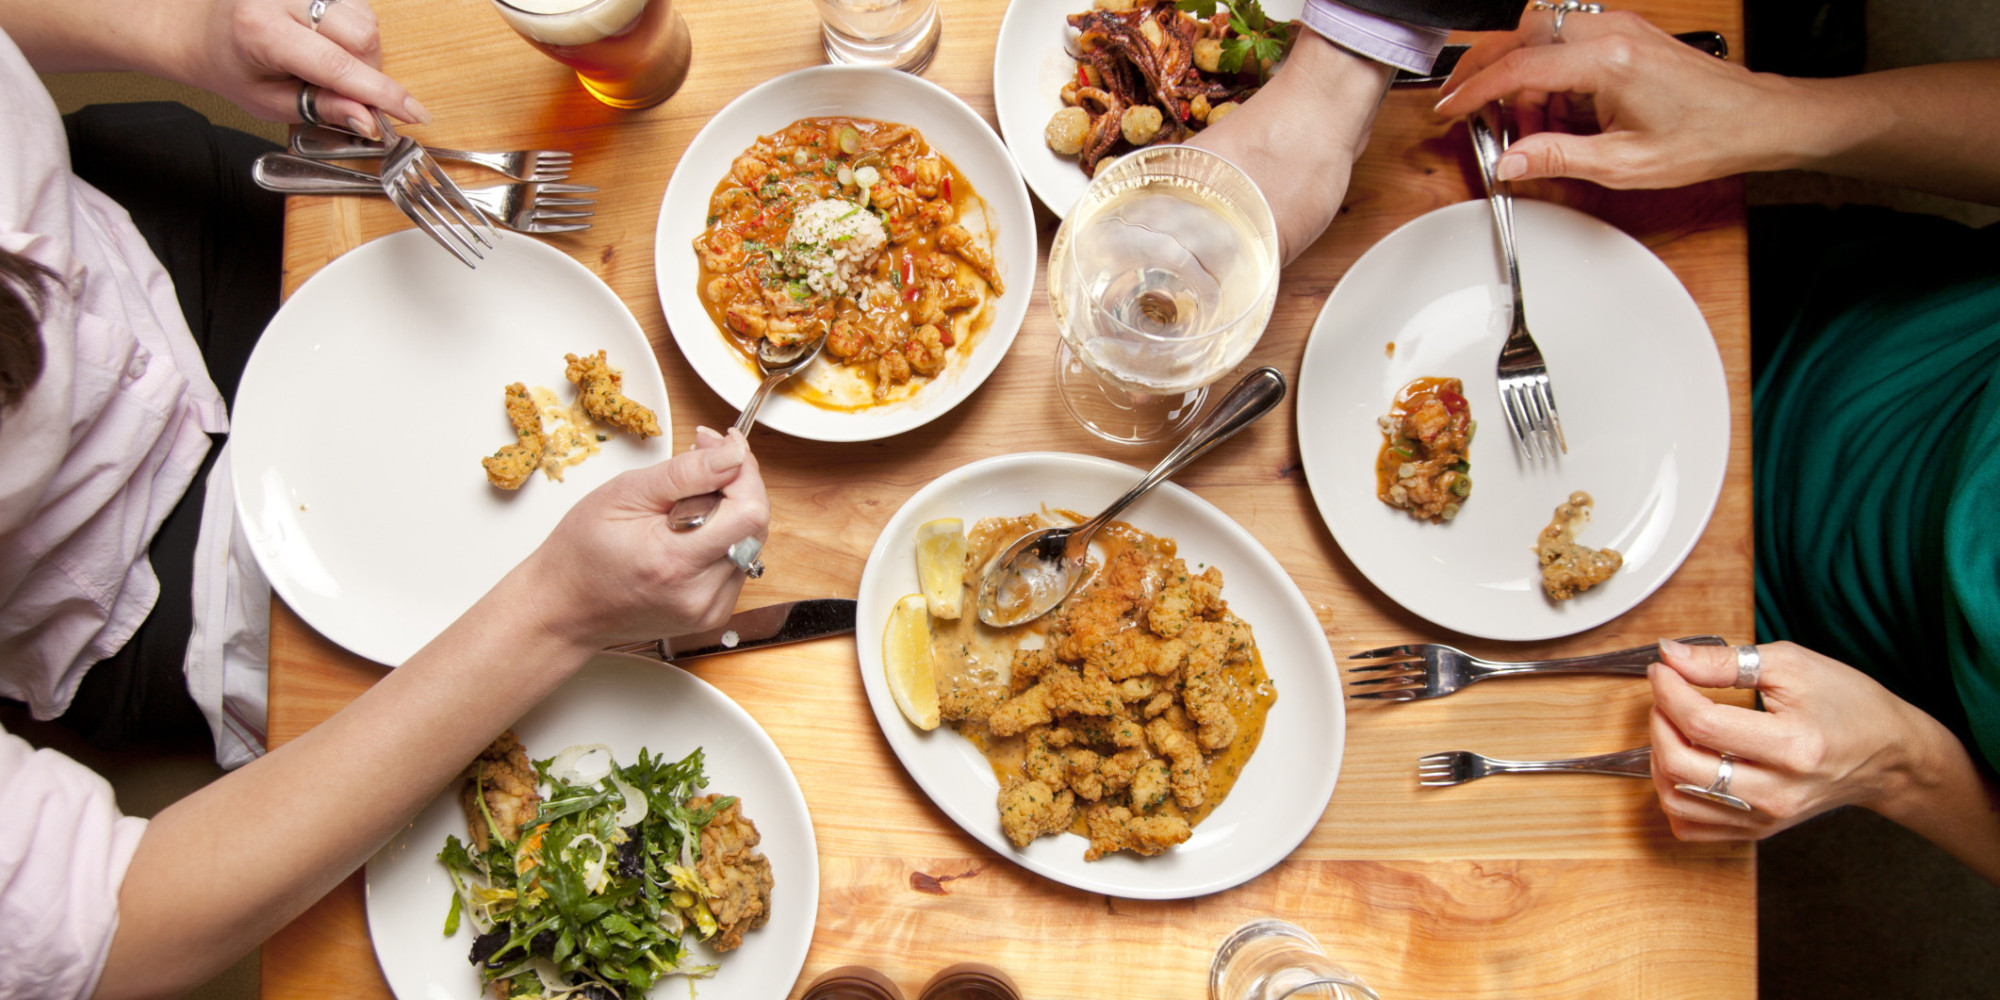 5 Tips to Keep Your Restaurant Meal Way Under 1,000 Calories | HuffPost